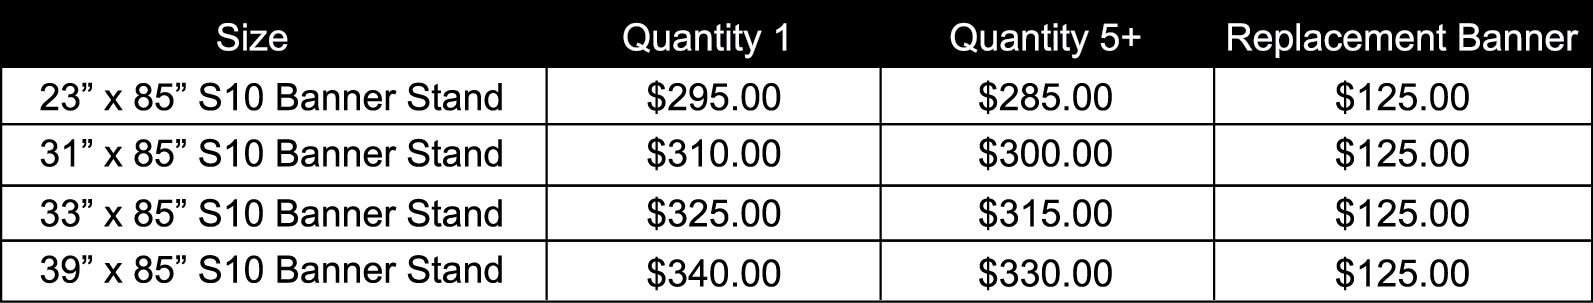 s10 banner stand pricing guide